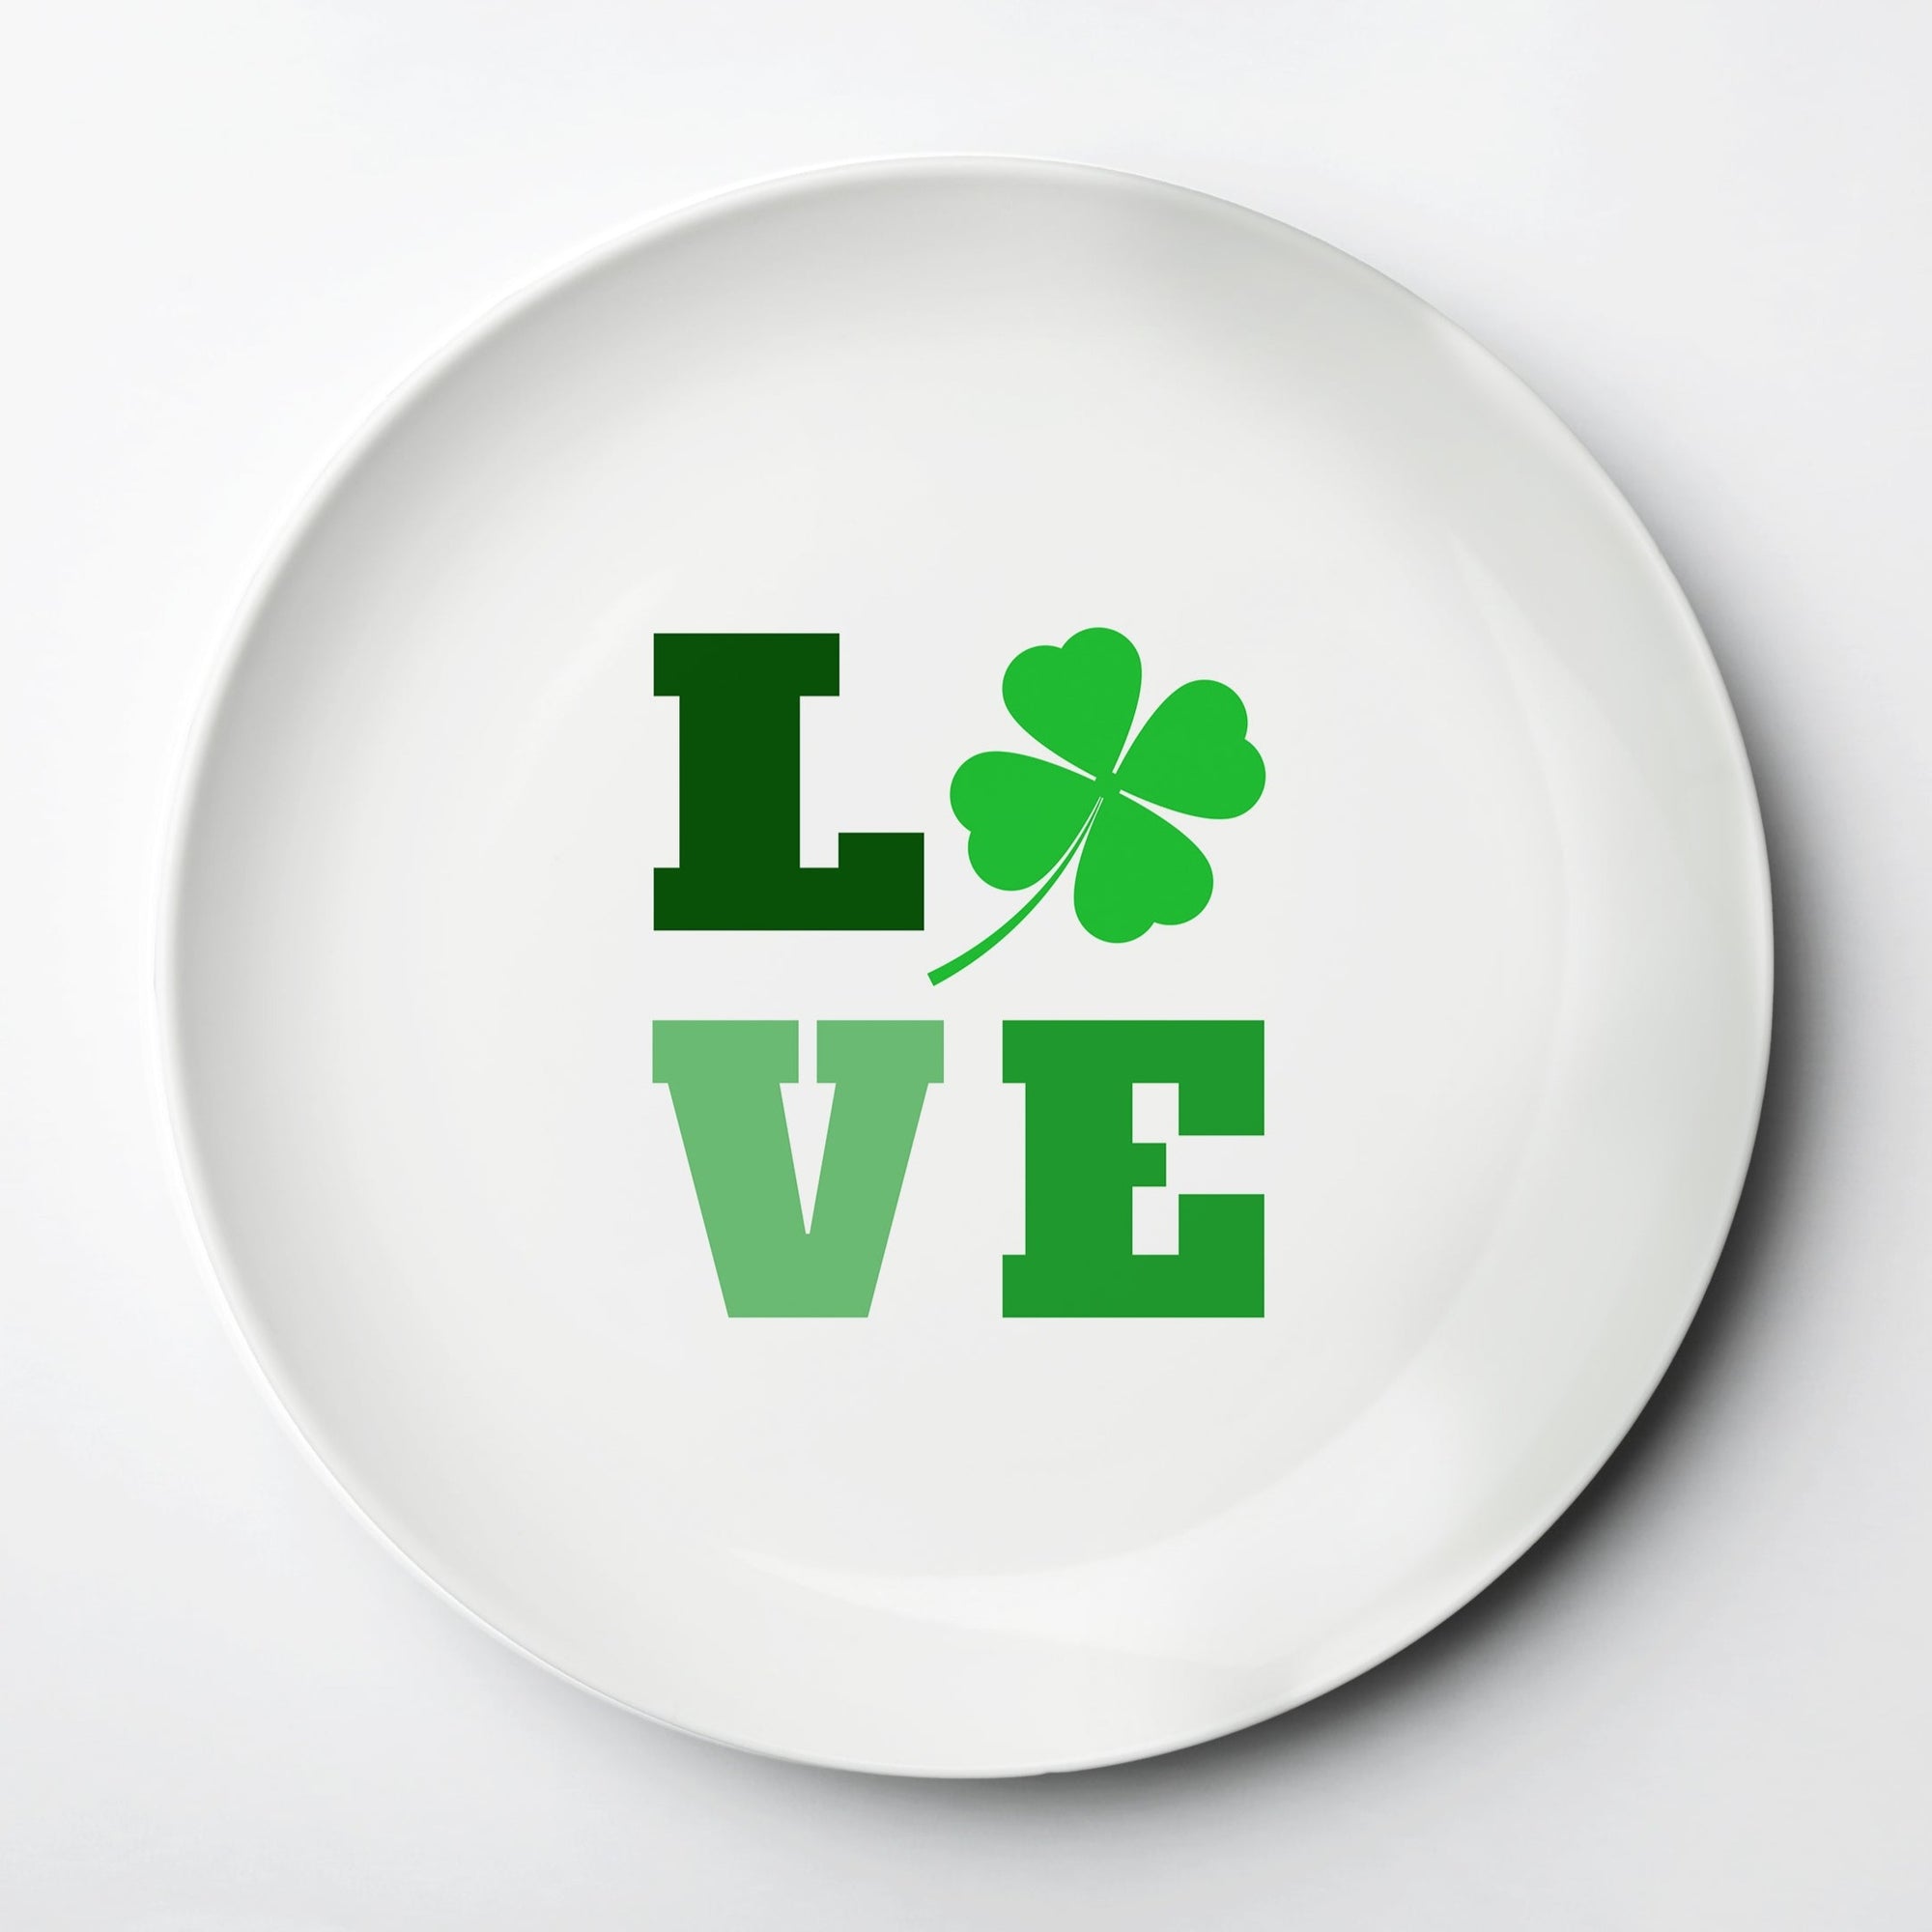 St. Patrick's Day Love ThermoSāf® kids reusable plate, microwave, dishwasher and oven safe.  Made in the USA, Pipsy.com